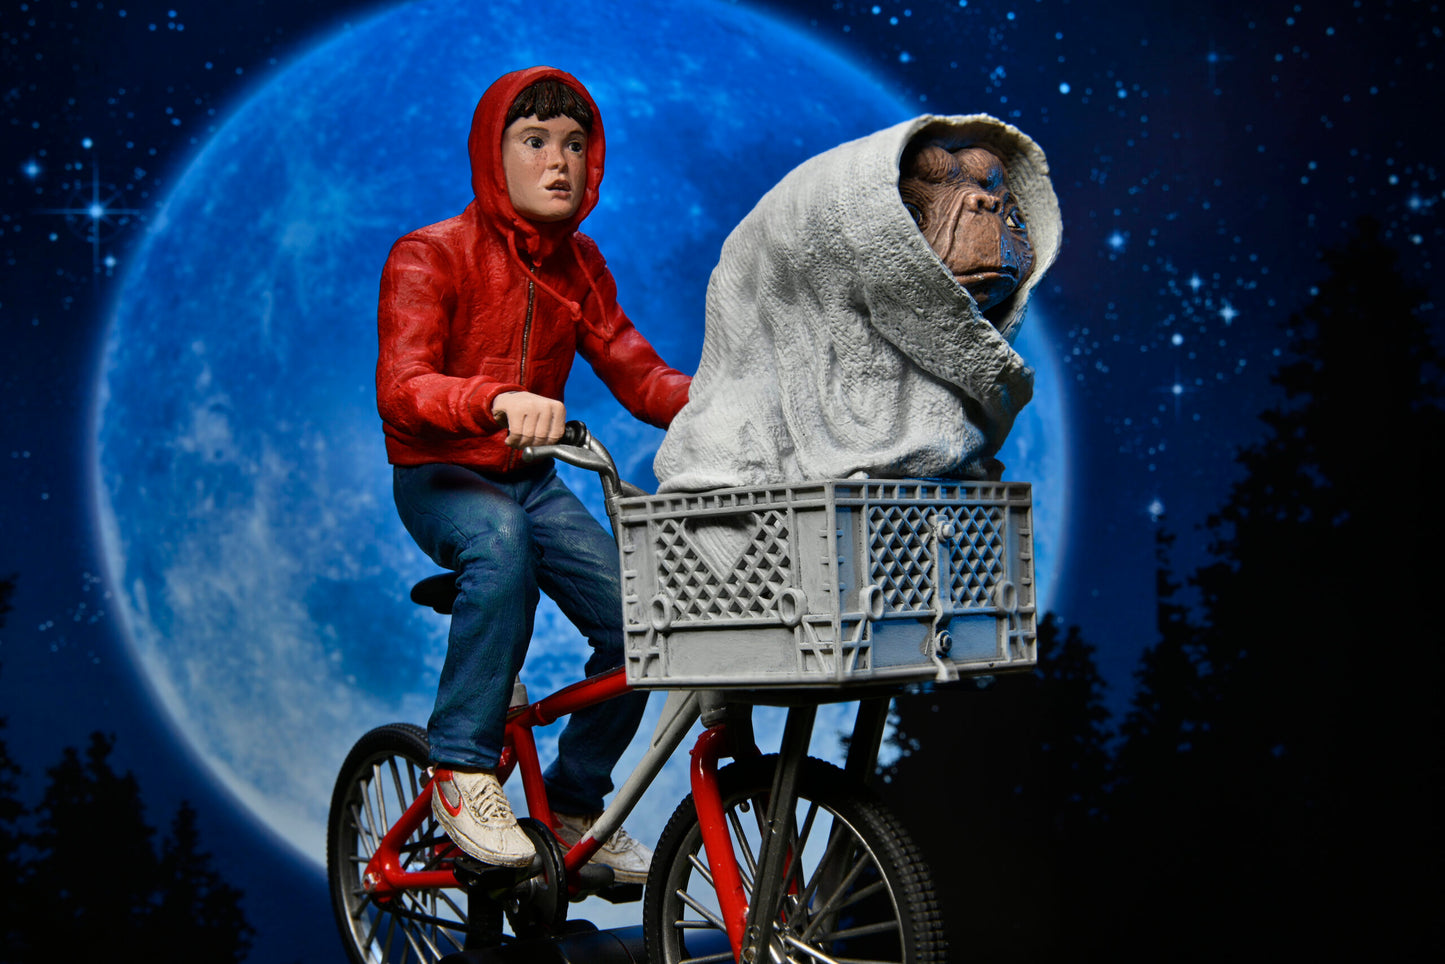 E.T. The Extra-Terrestrial 40th Anniversary

7″ Scale Action Figure – Elliott & E.T. on Bicycle